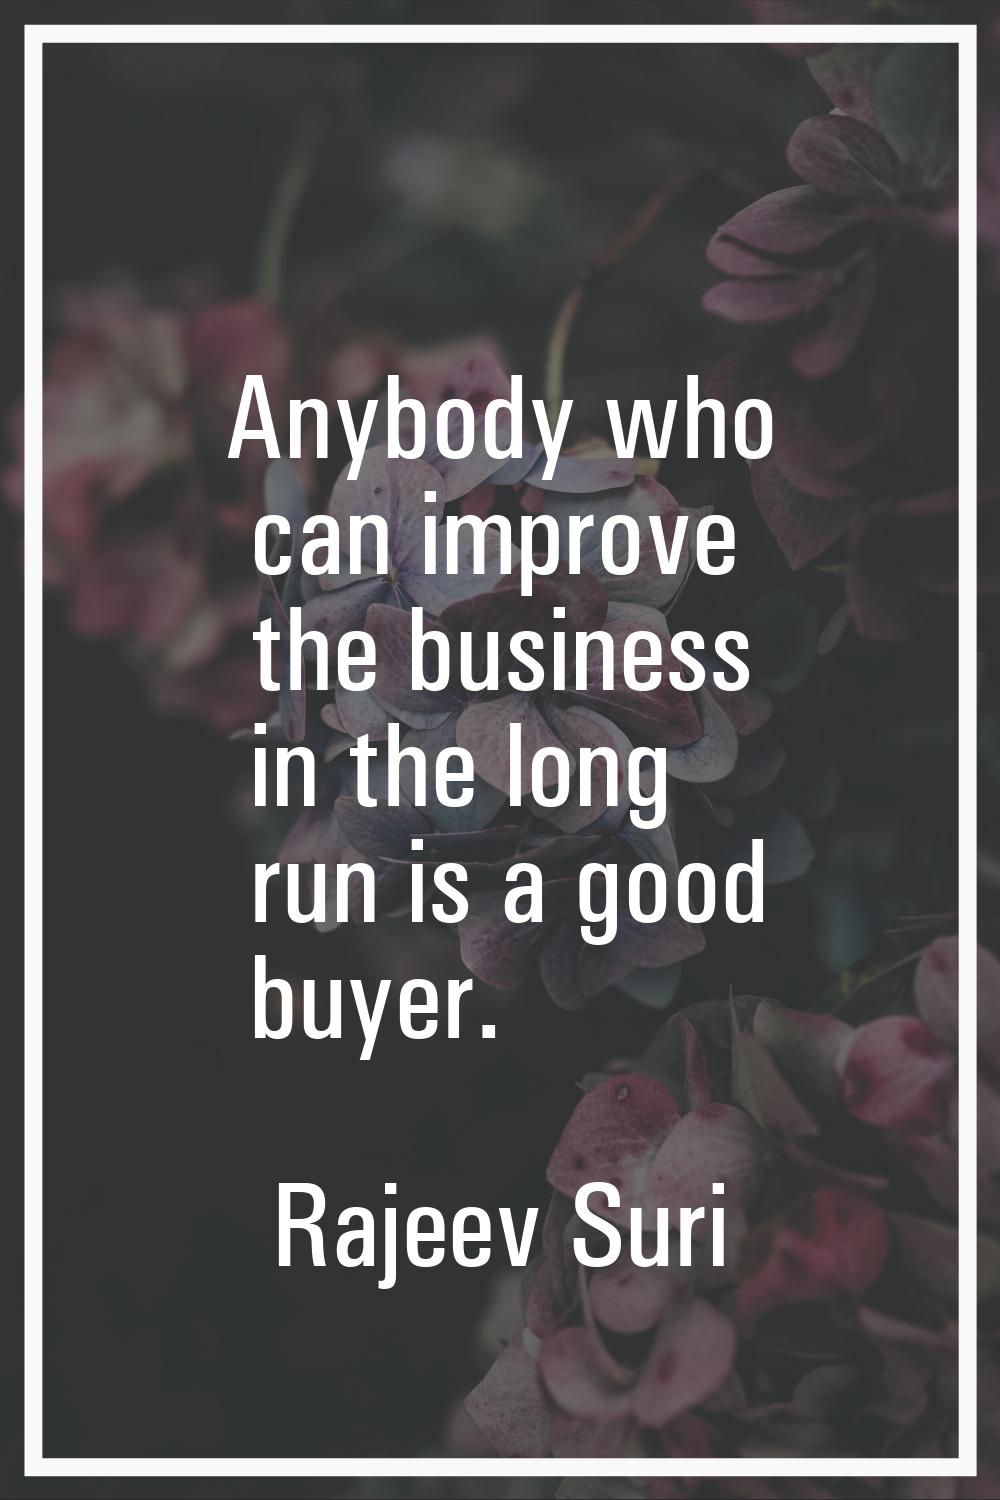 Anybody who can improve the business in the long run is a good buyer.